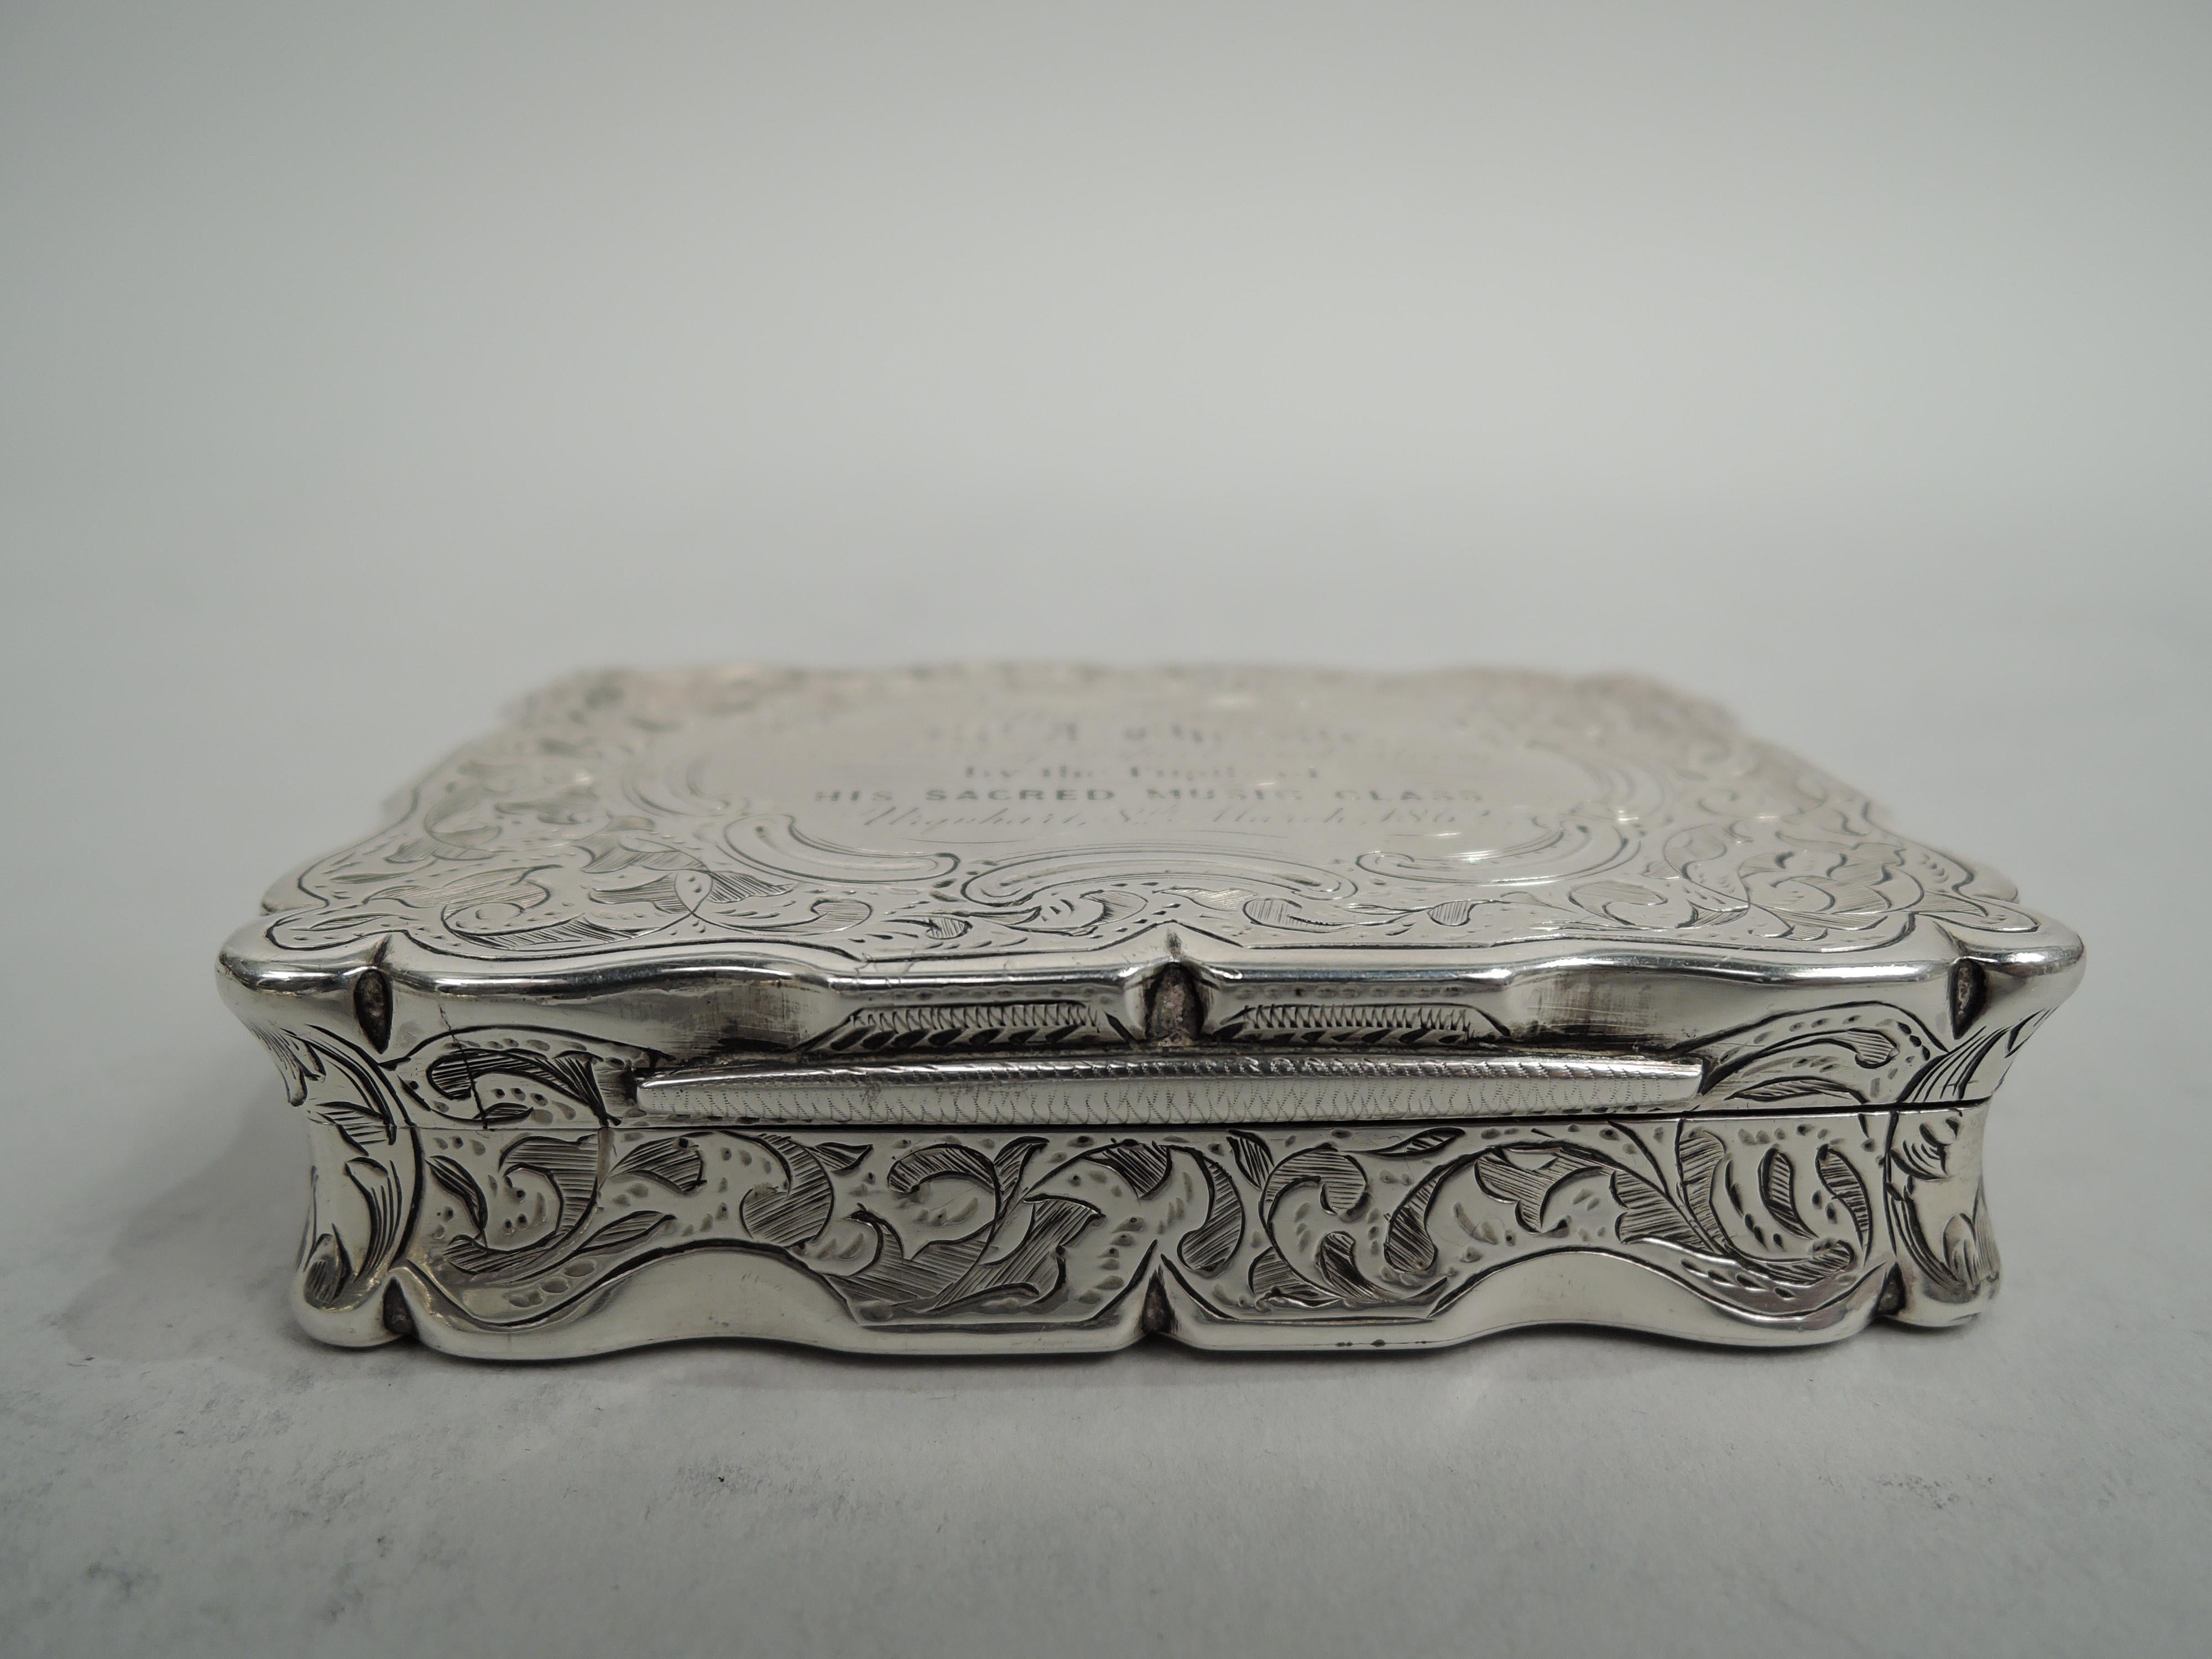 Victorian Classical sterling silver snuff box. Made by Frederick Marson in Birmingham in 1860. Rectangular with concave sides, curved corners, flat and hinged cover, and curvilinear rims. Densely engraved and shaded leafing scrollwork. On cover top